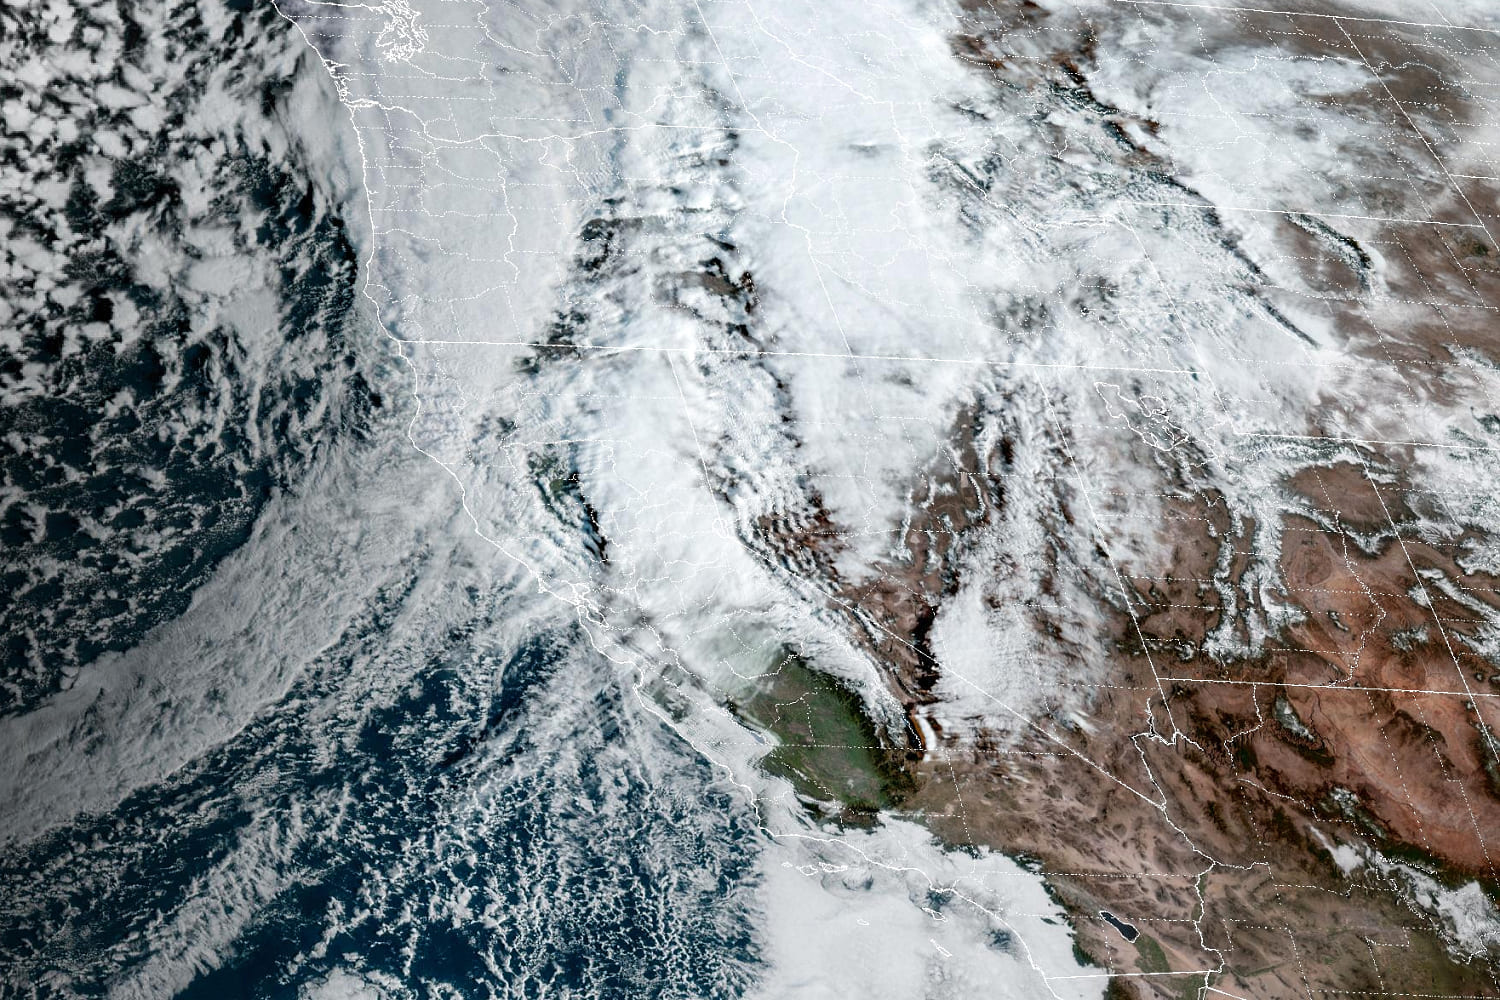 California could get 10 feet of snow as Sierra Nevada braces for blizzard with up to 100 mph winds